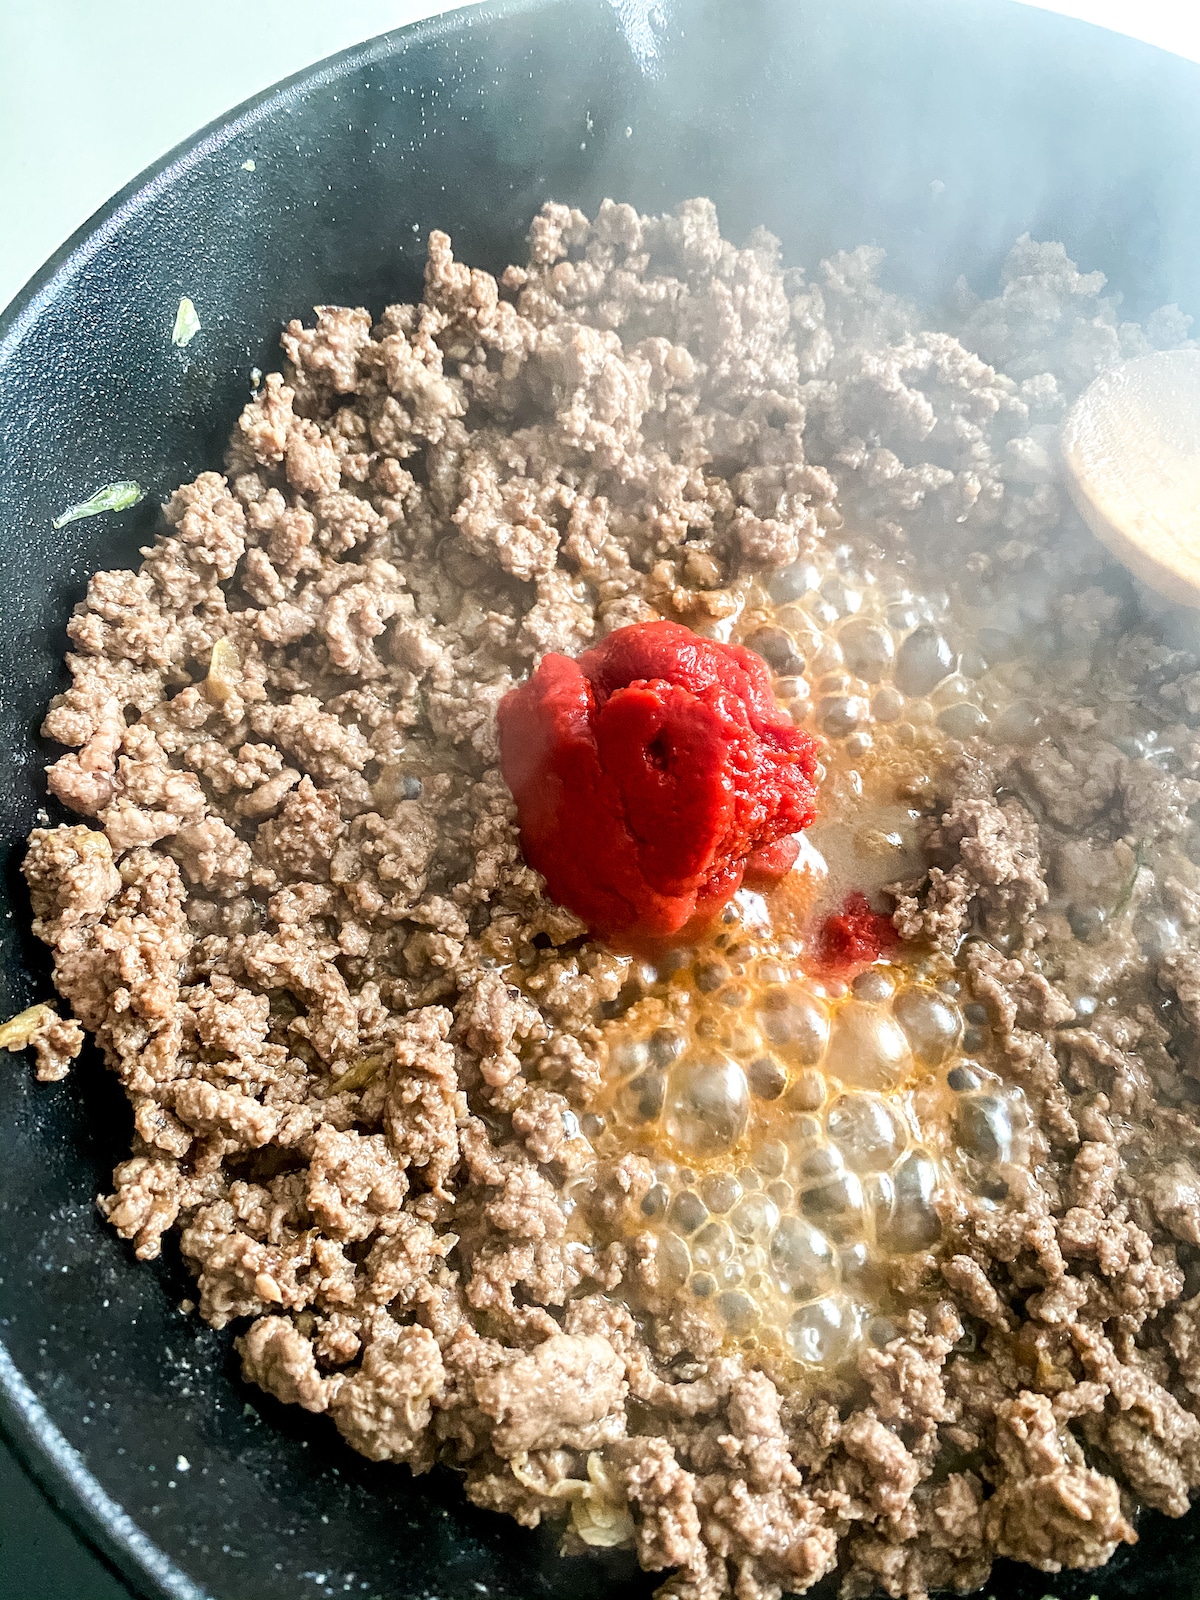 Cooked ground meat